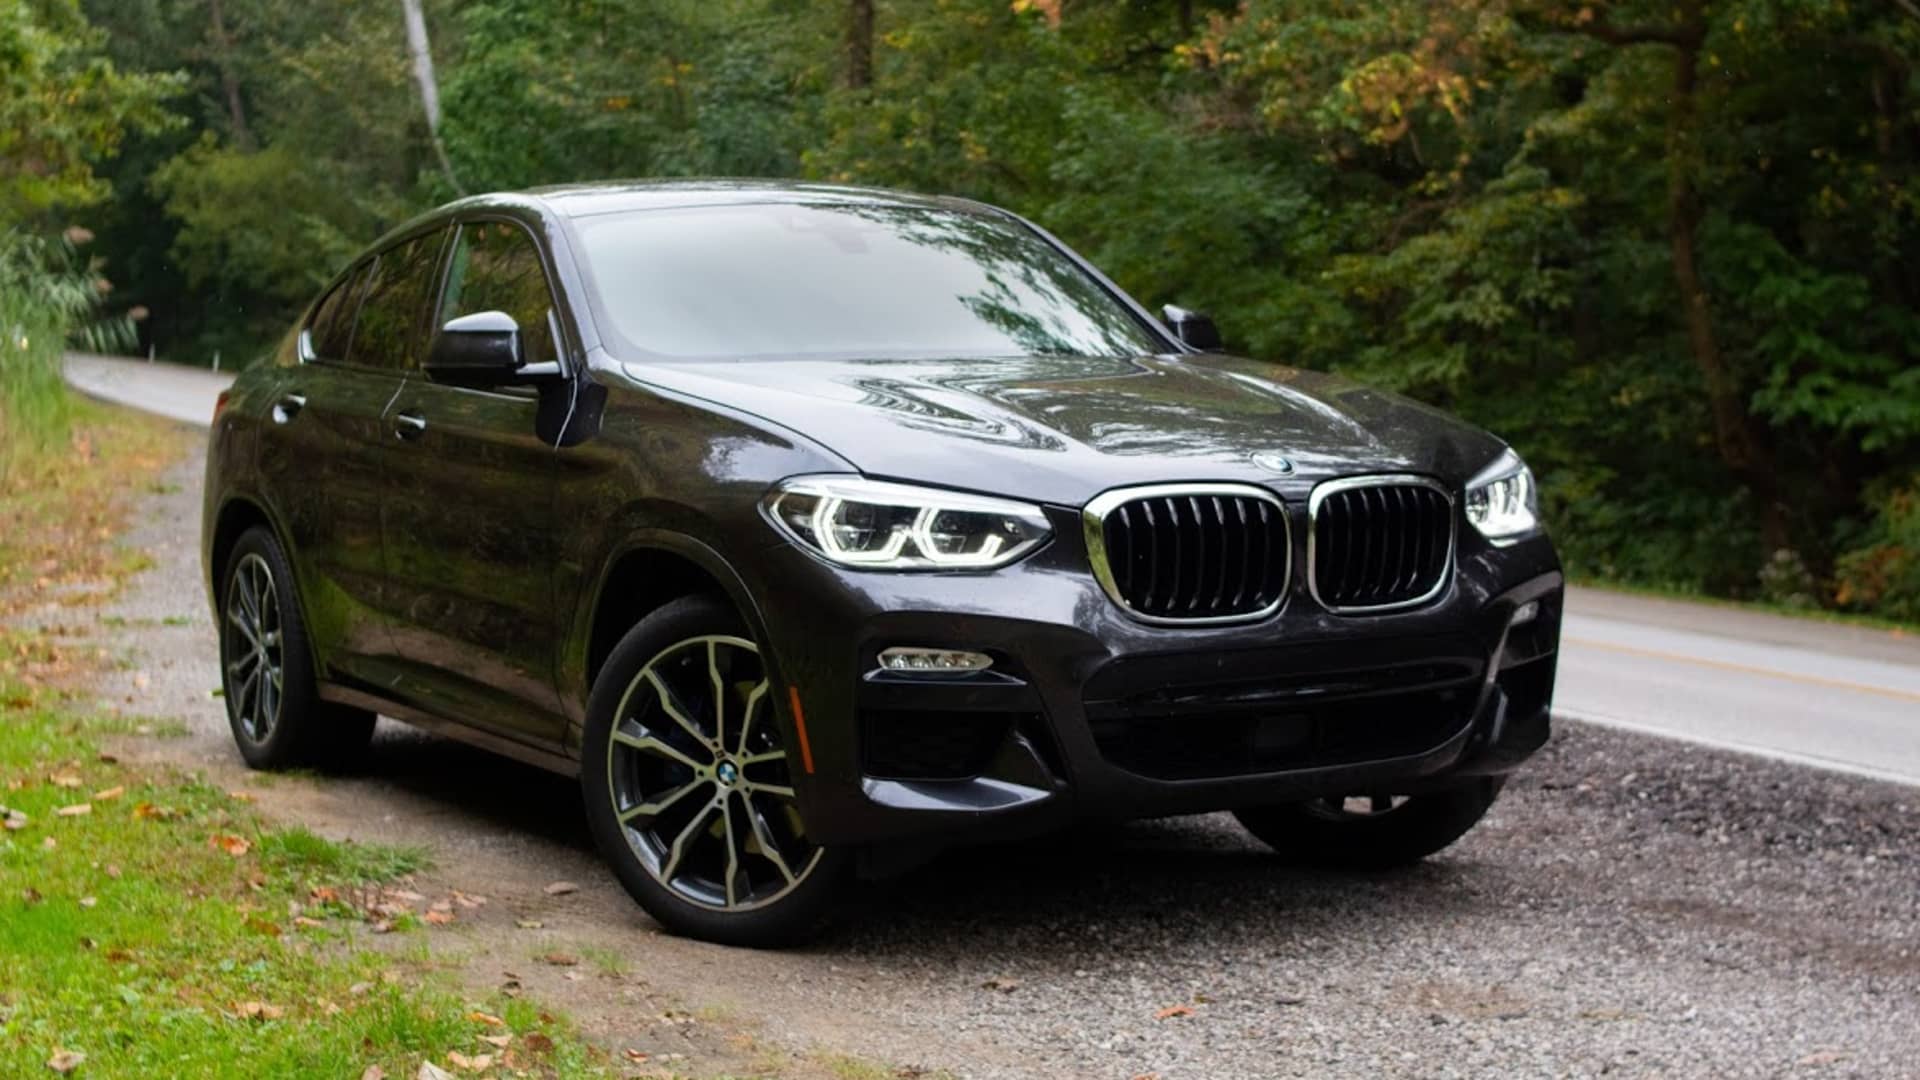 Review: The 2019 BMW X4 xDrive30i is too weird looking and expensive to recommend